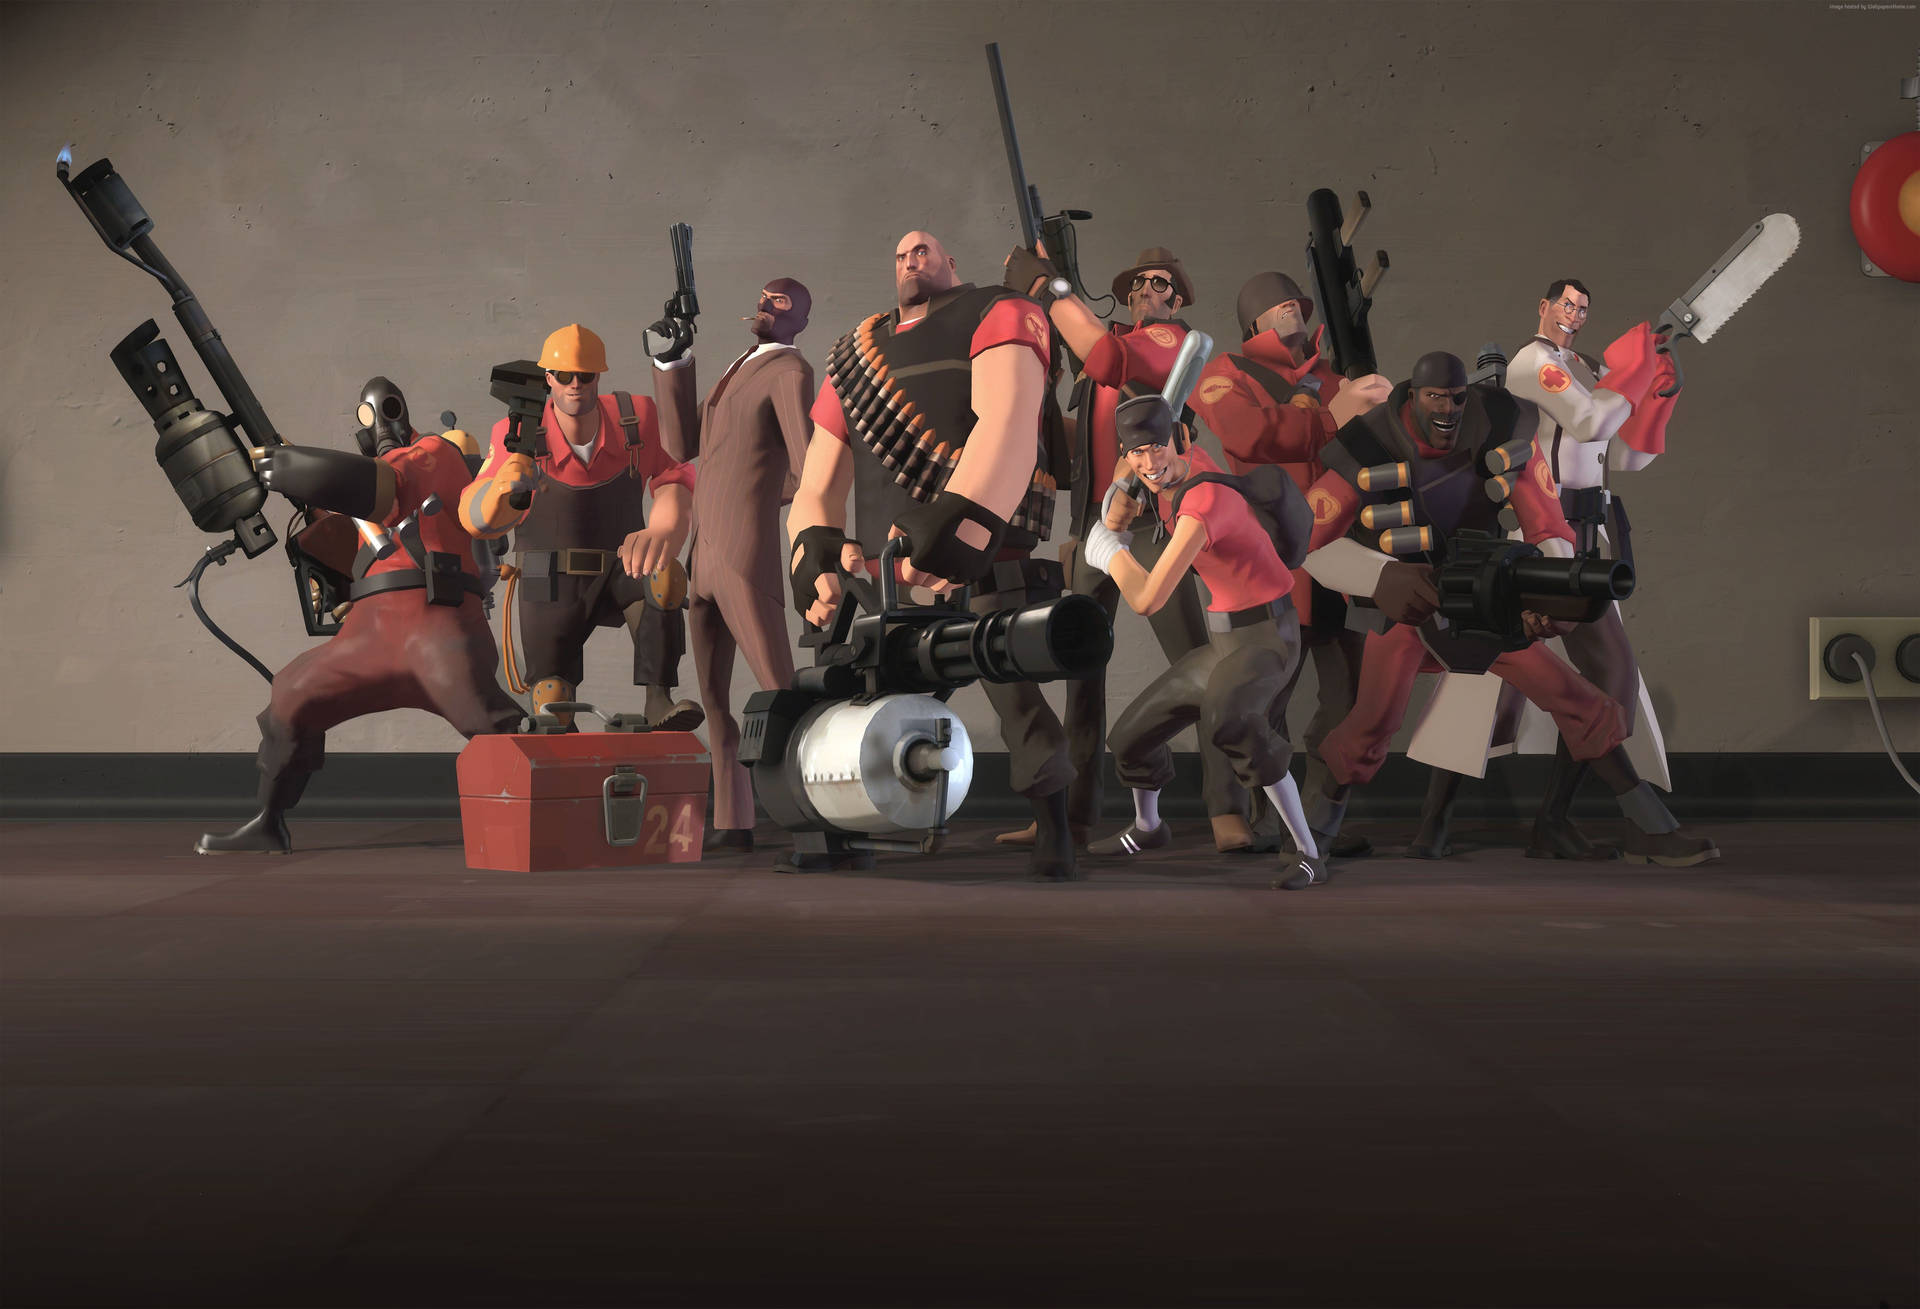 Top 999+ Tf2 Wallpaper Full HD, 4K✅Free to Use